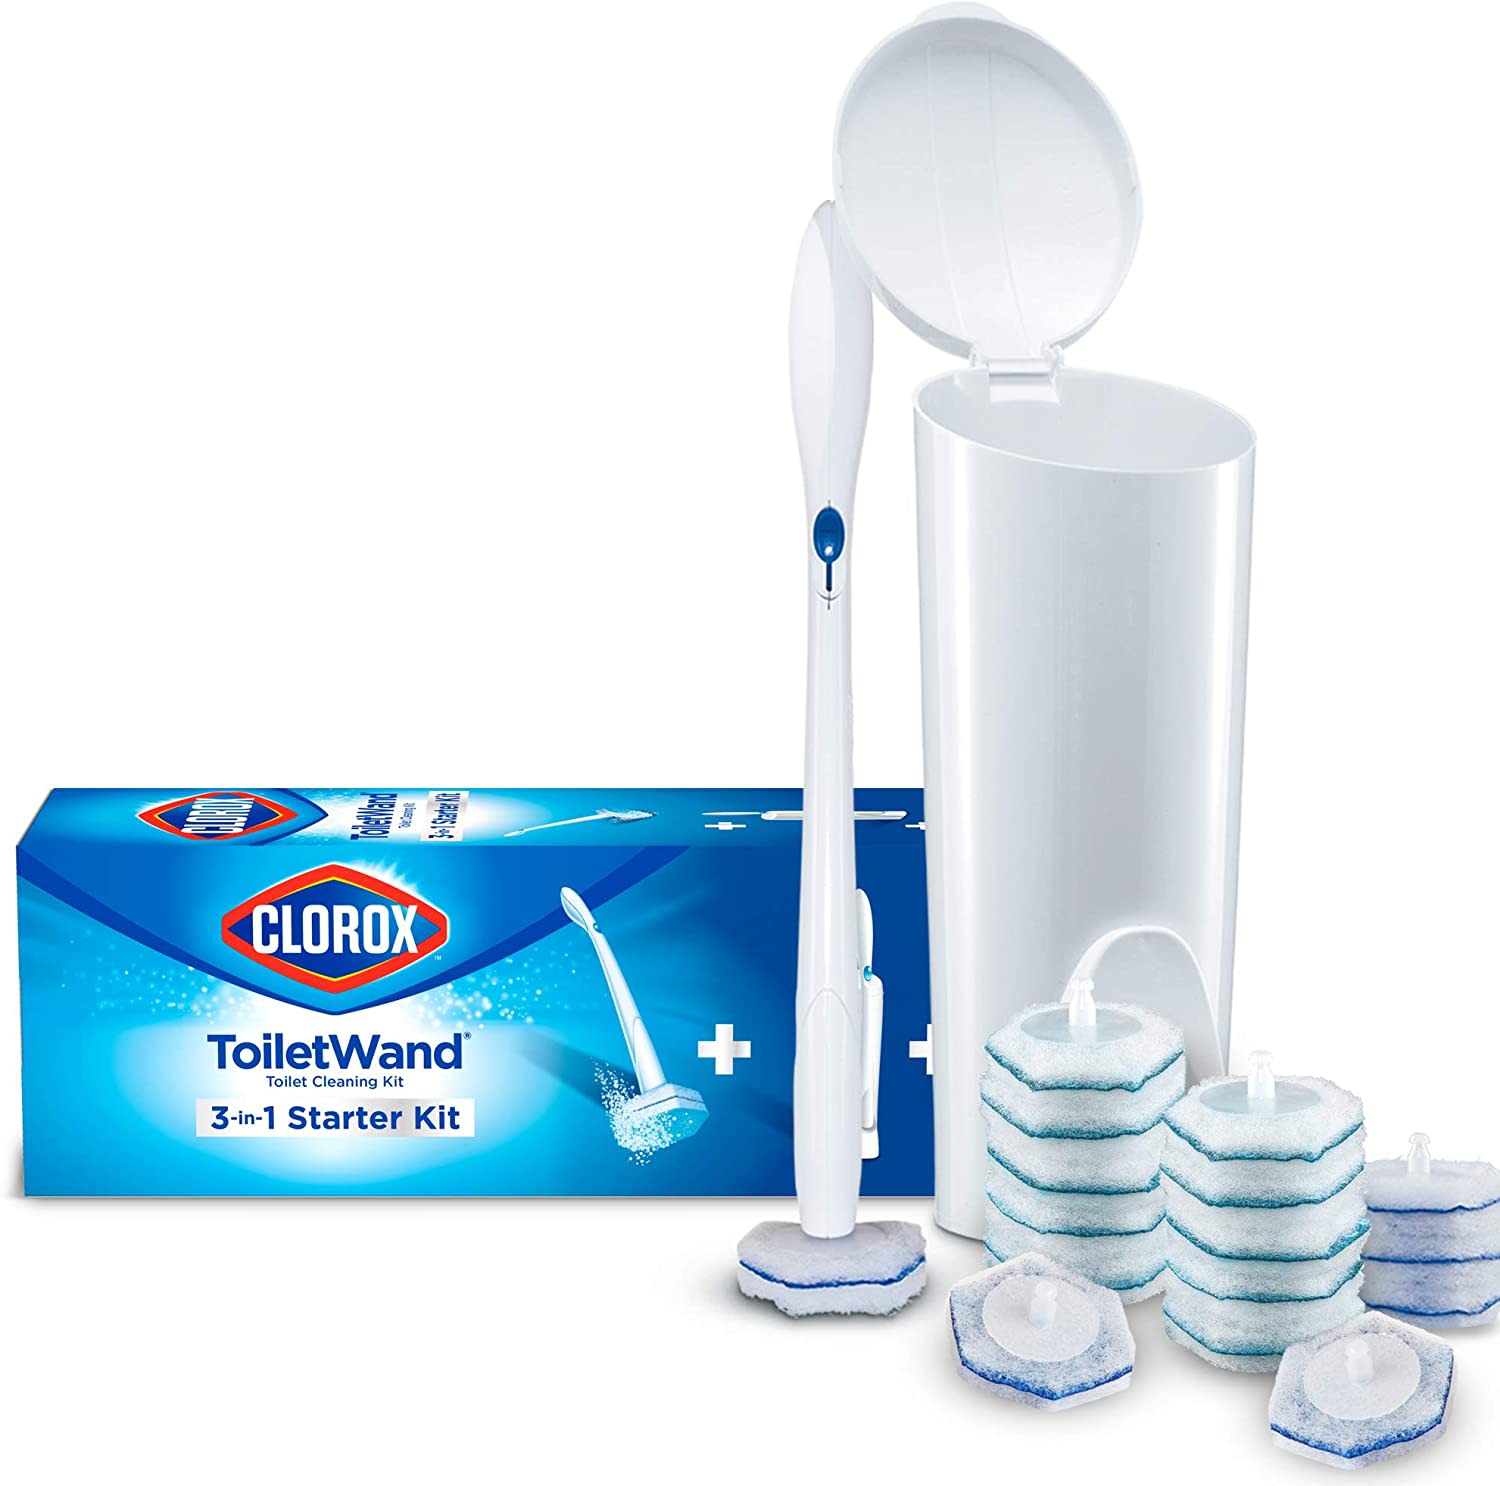 http://cdn.apartmenttherapy.info/image/upload/v1632764904/gen-workflow/product-database/clorox_toilet_wand.jpg